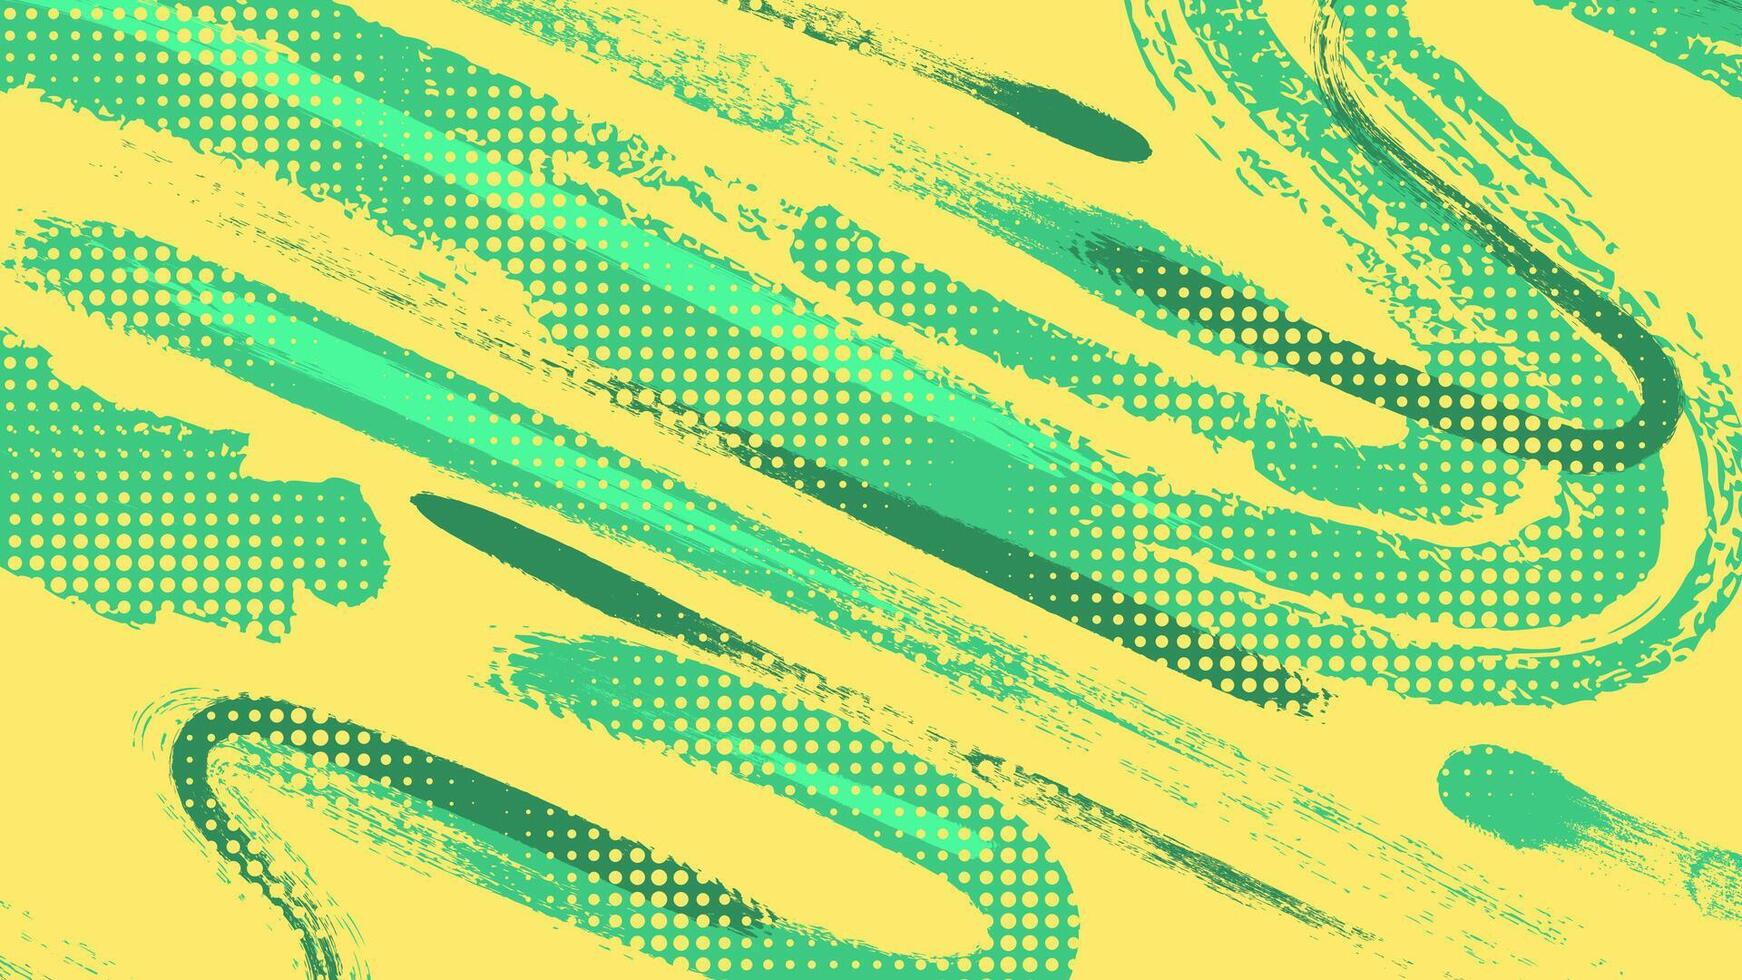 Abstract Green and Yellow Grunge Brush Background with Halftone Effect. Sports Background with Grunge Concept vector